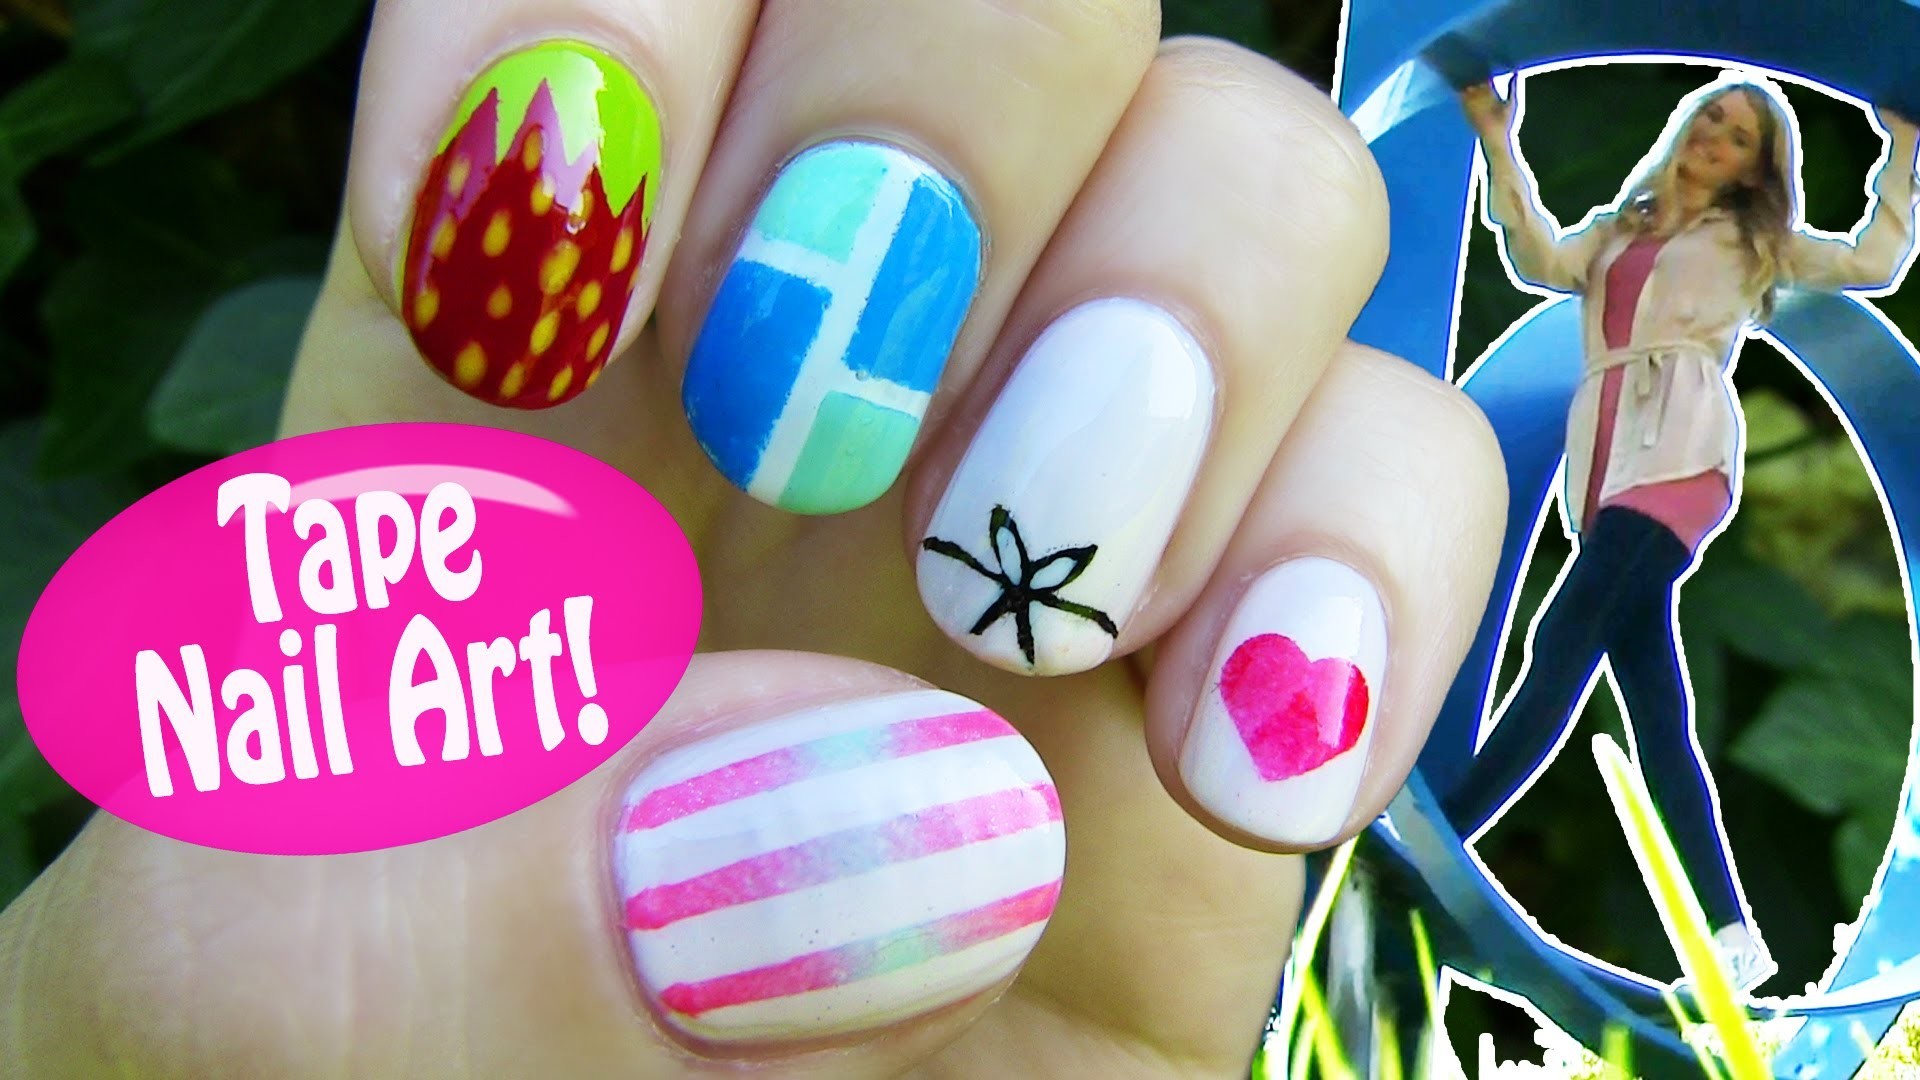 5. Nail Art Tutorial with Nail Art Tape - wide 1